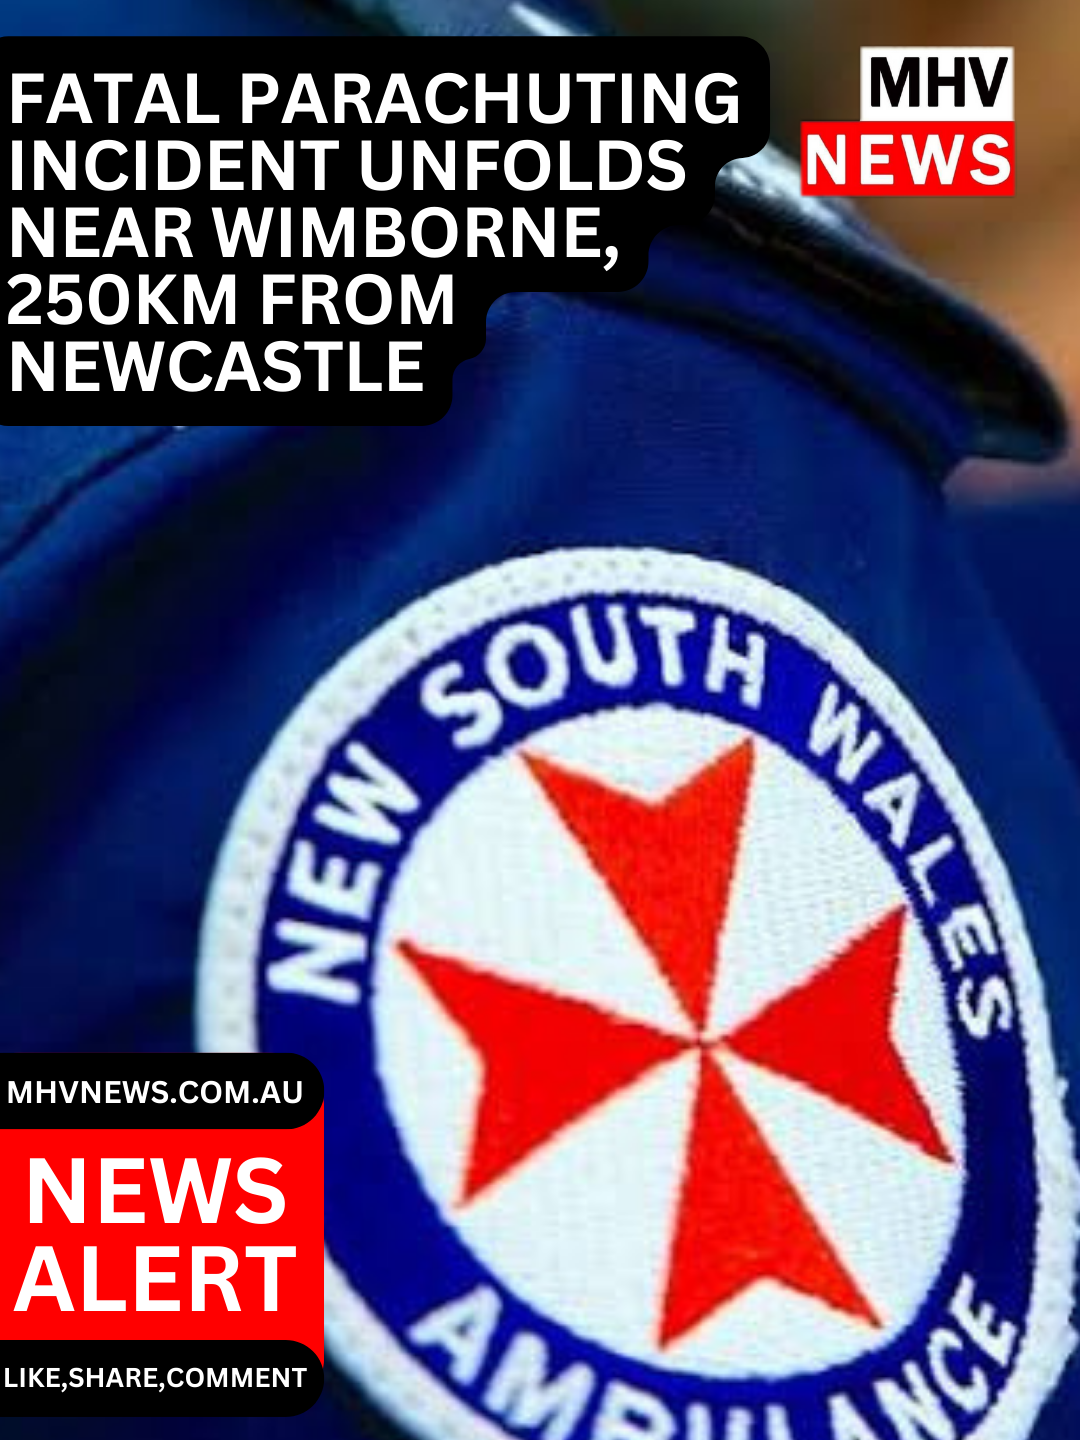 You are currently viewing Fatal Parachuting Incident Unfolds Near Wimborne, 250km from Newcastle